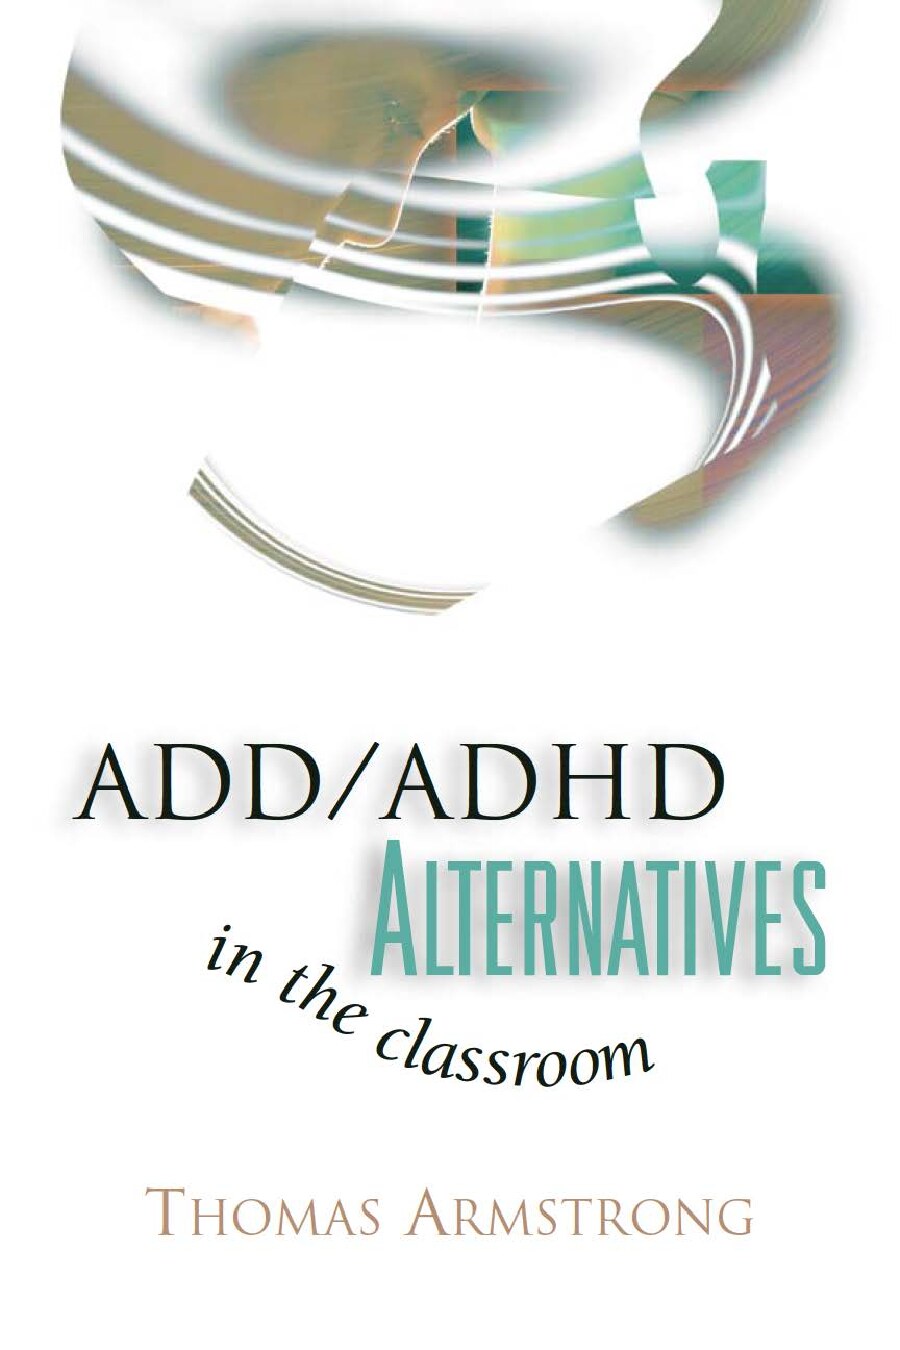 ADD ADHD Alternatives in the Classroom by Thomas Armstrong (z-lib.org)